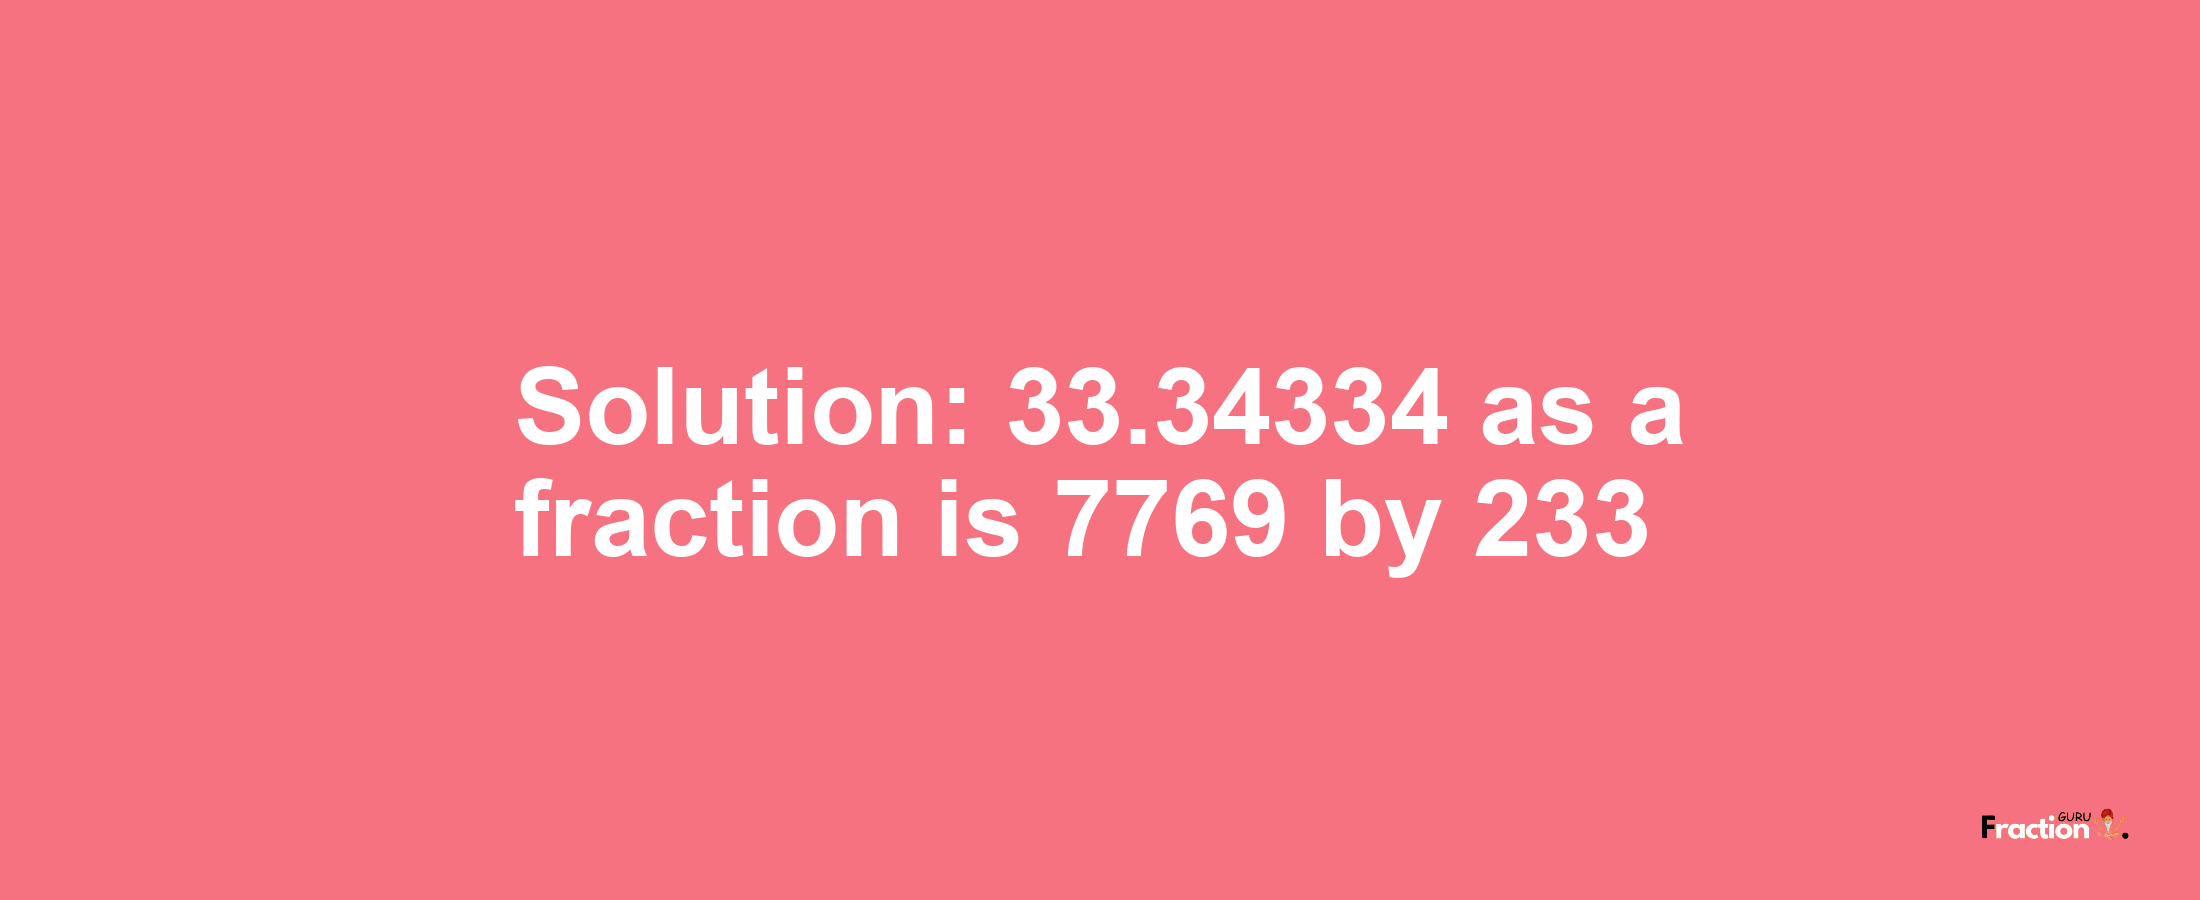 Solution:33.34334 as a fraction is 7769/233